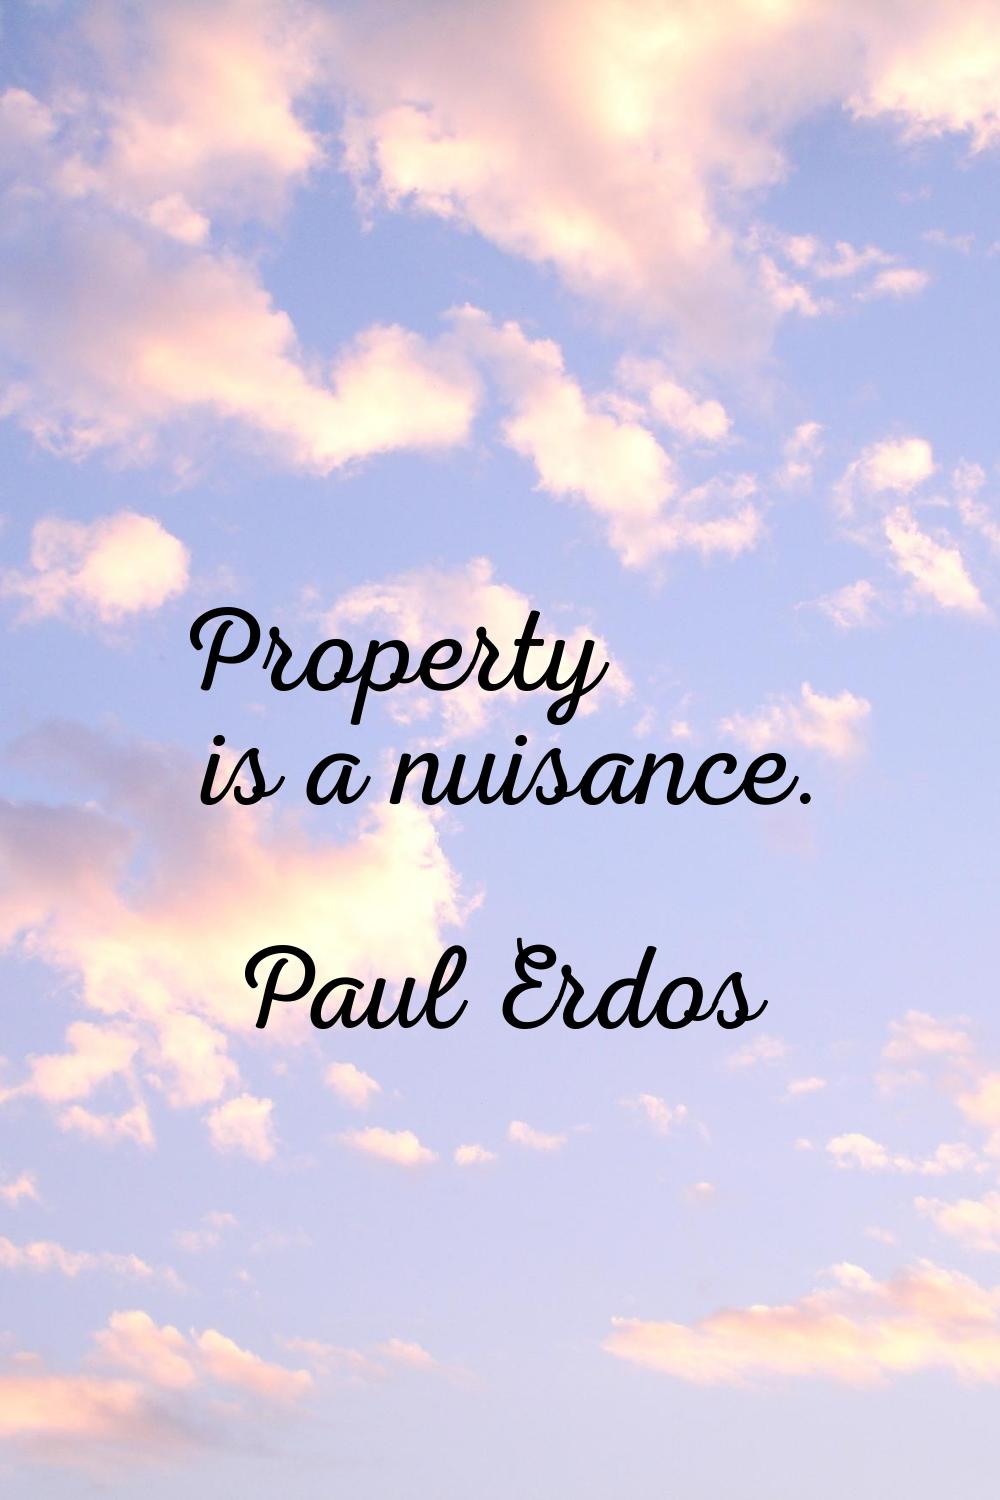 Property is a nuisance.